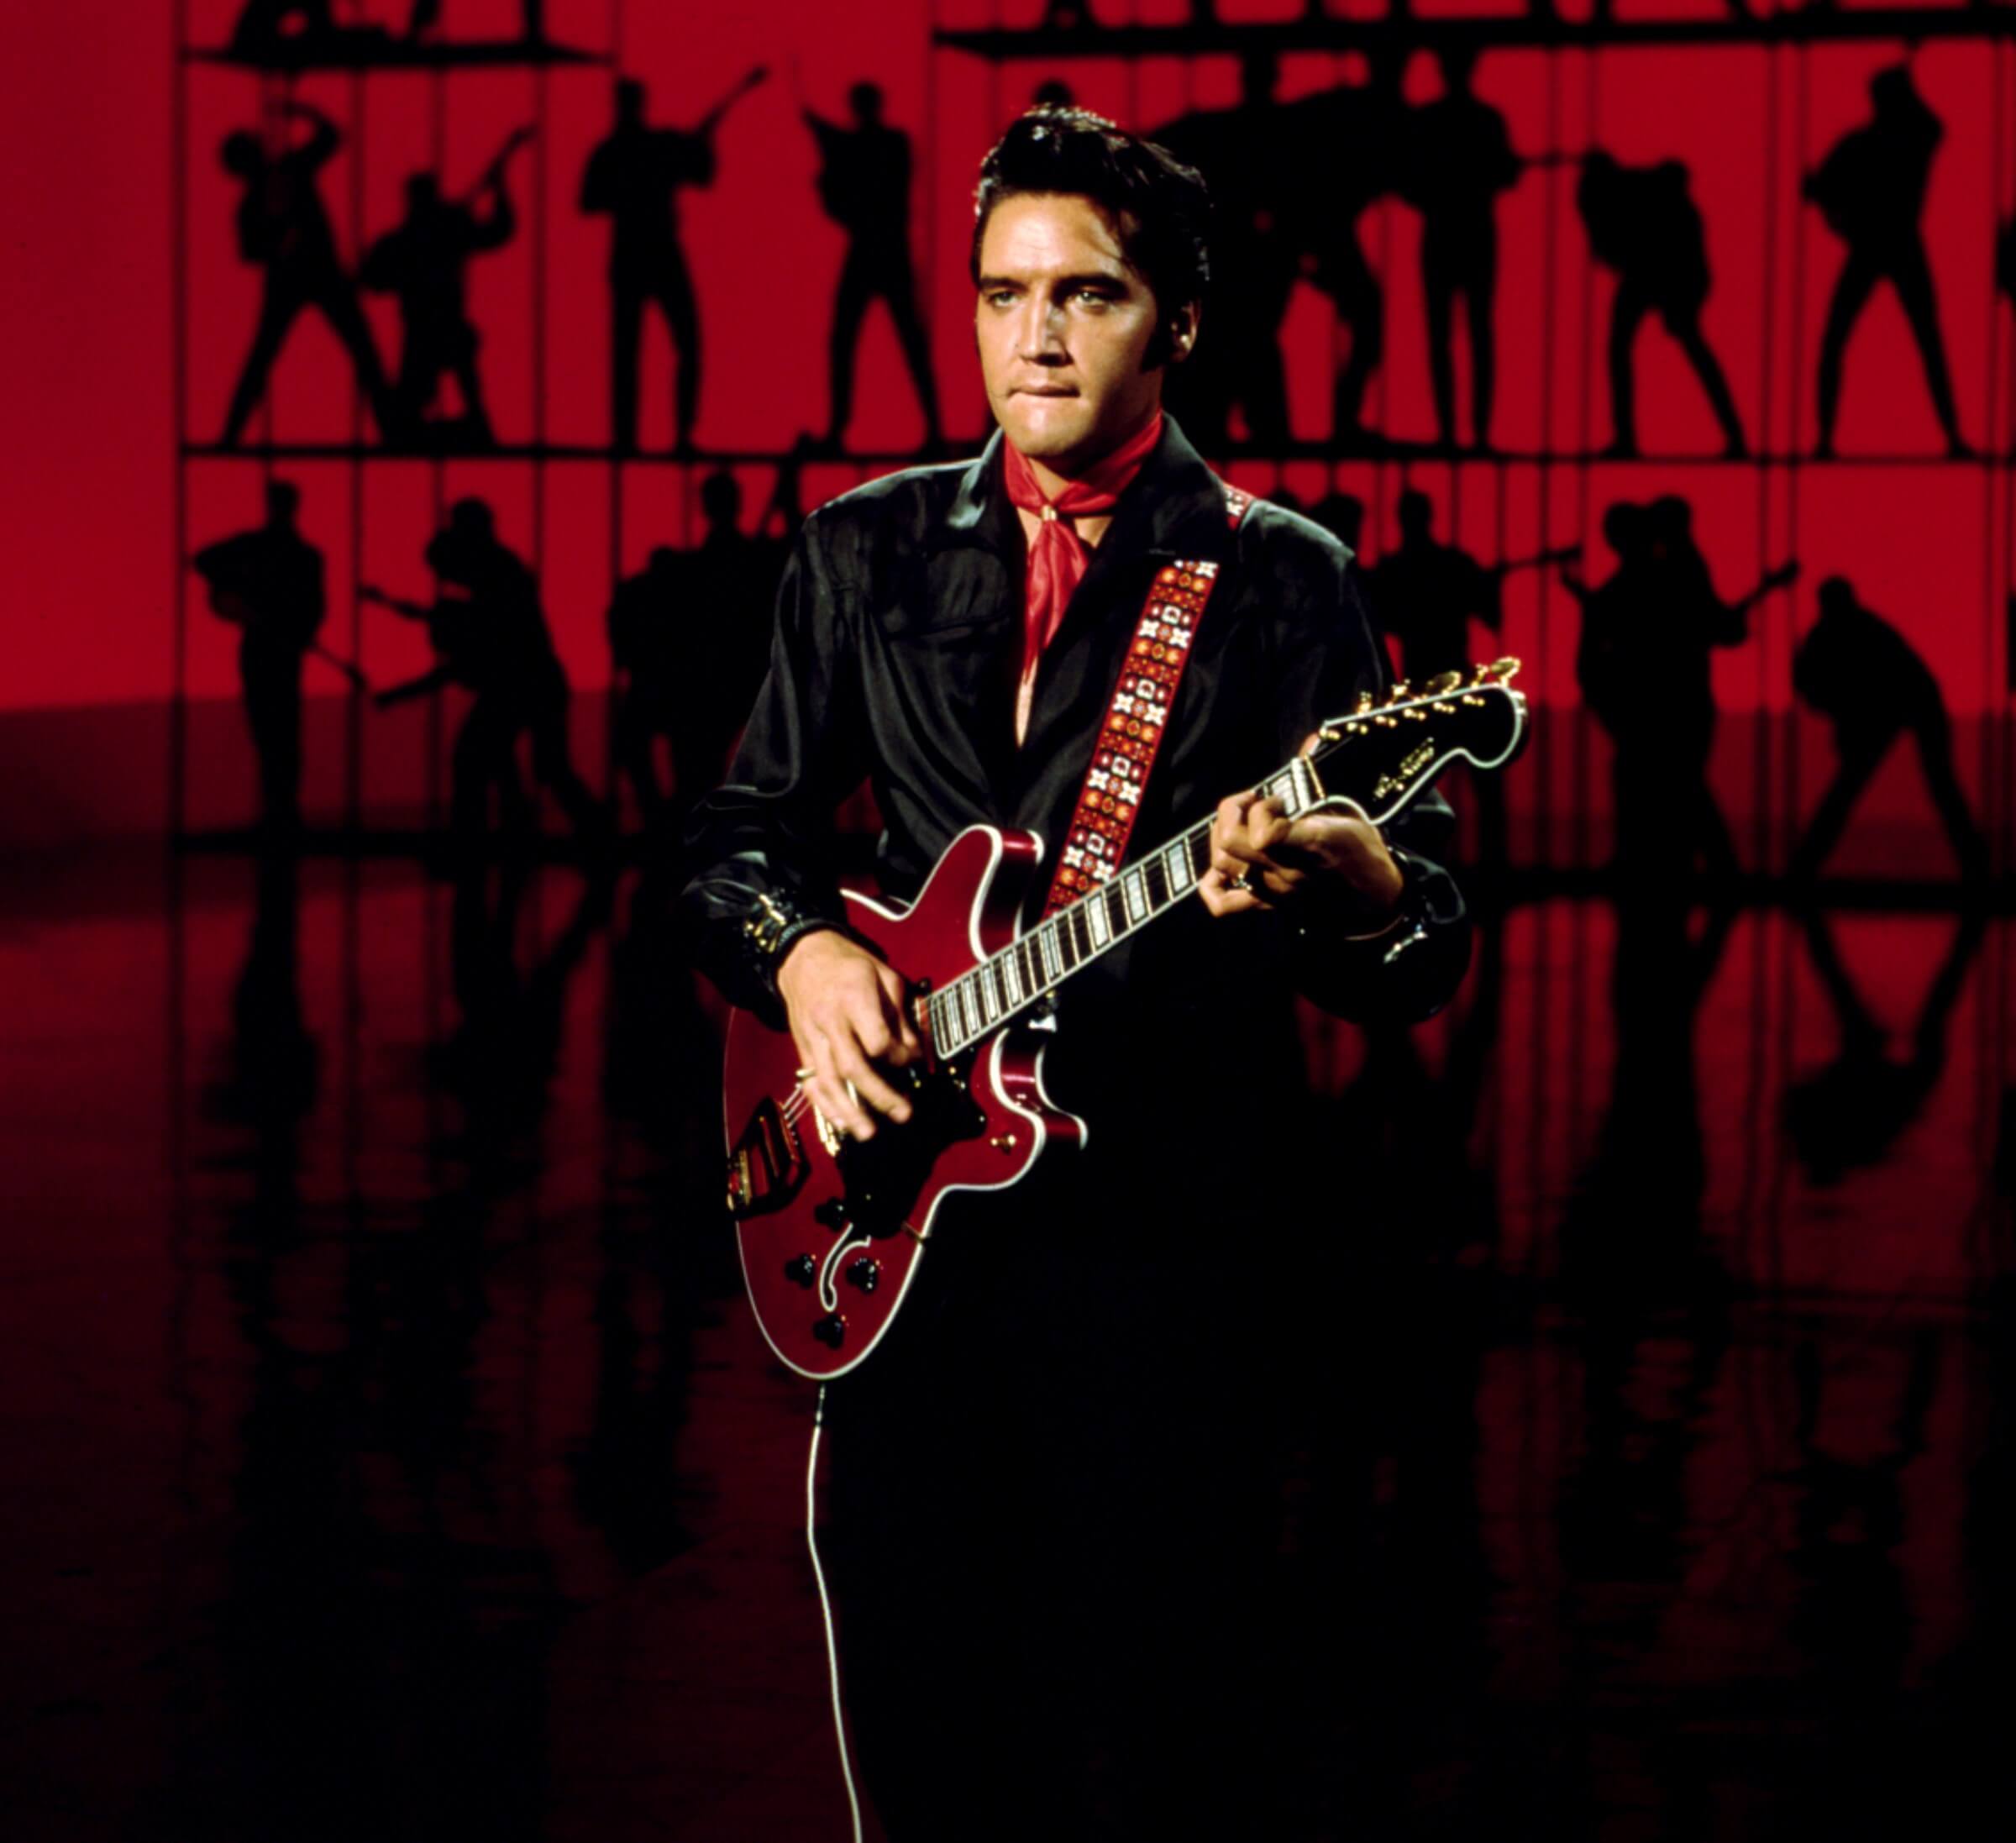 Elvis Presley playing songs with a guitar